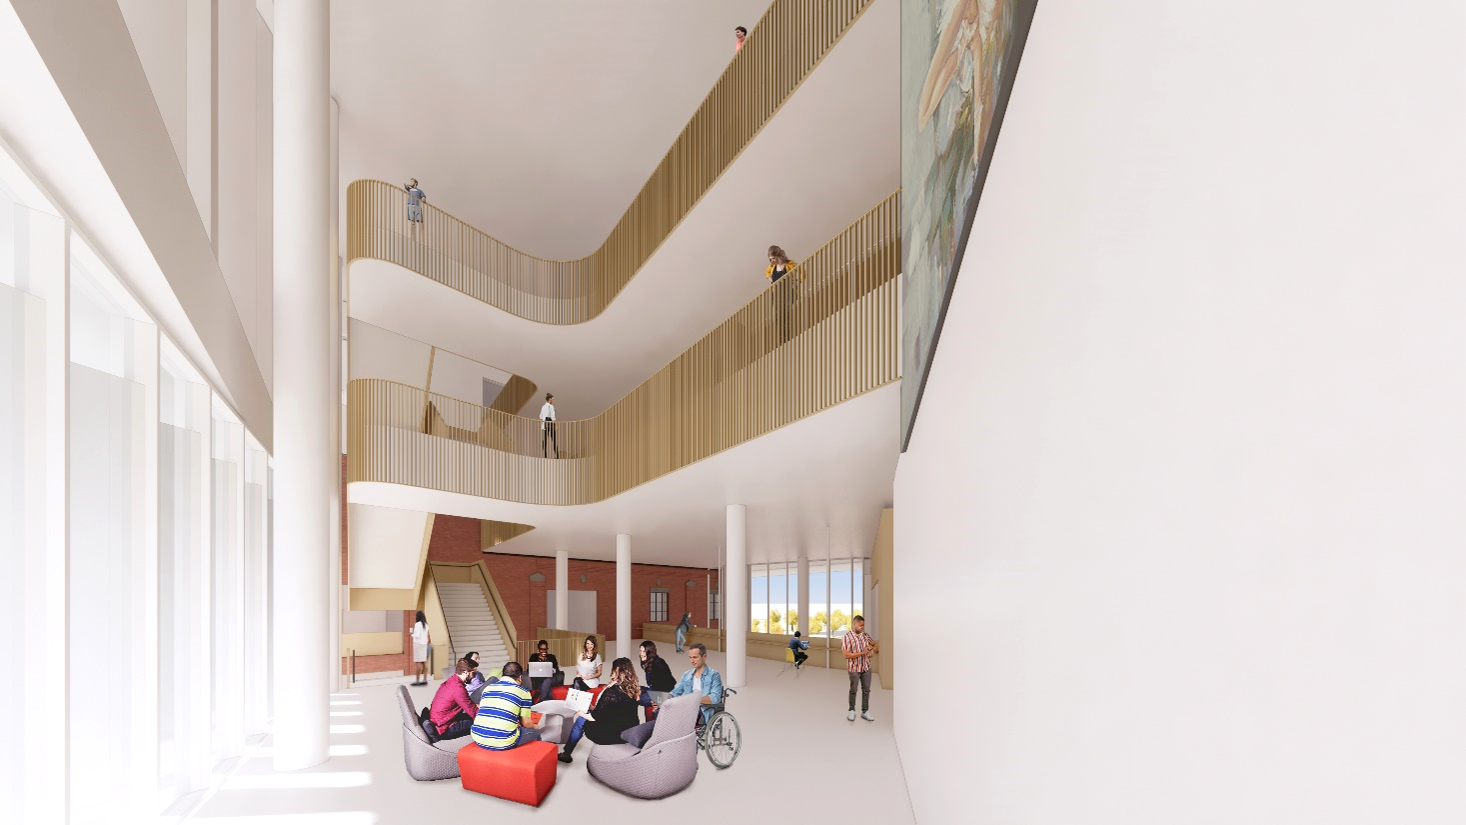 Draft design rendering of the bright multi level lobby area showing a casual seating or meeting area and upper floor lobby spaces with wooden railings. People are hanging out in the seating area.